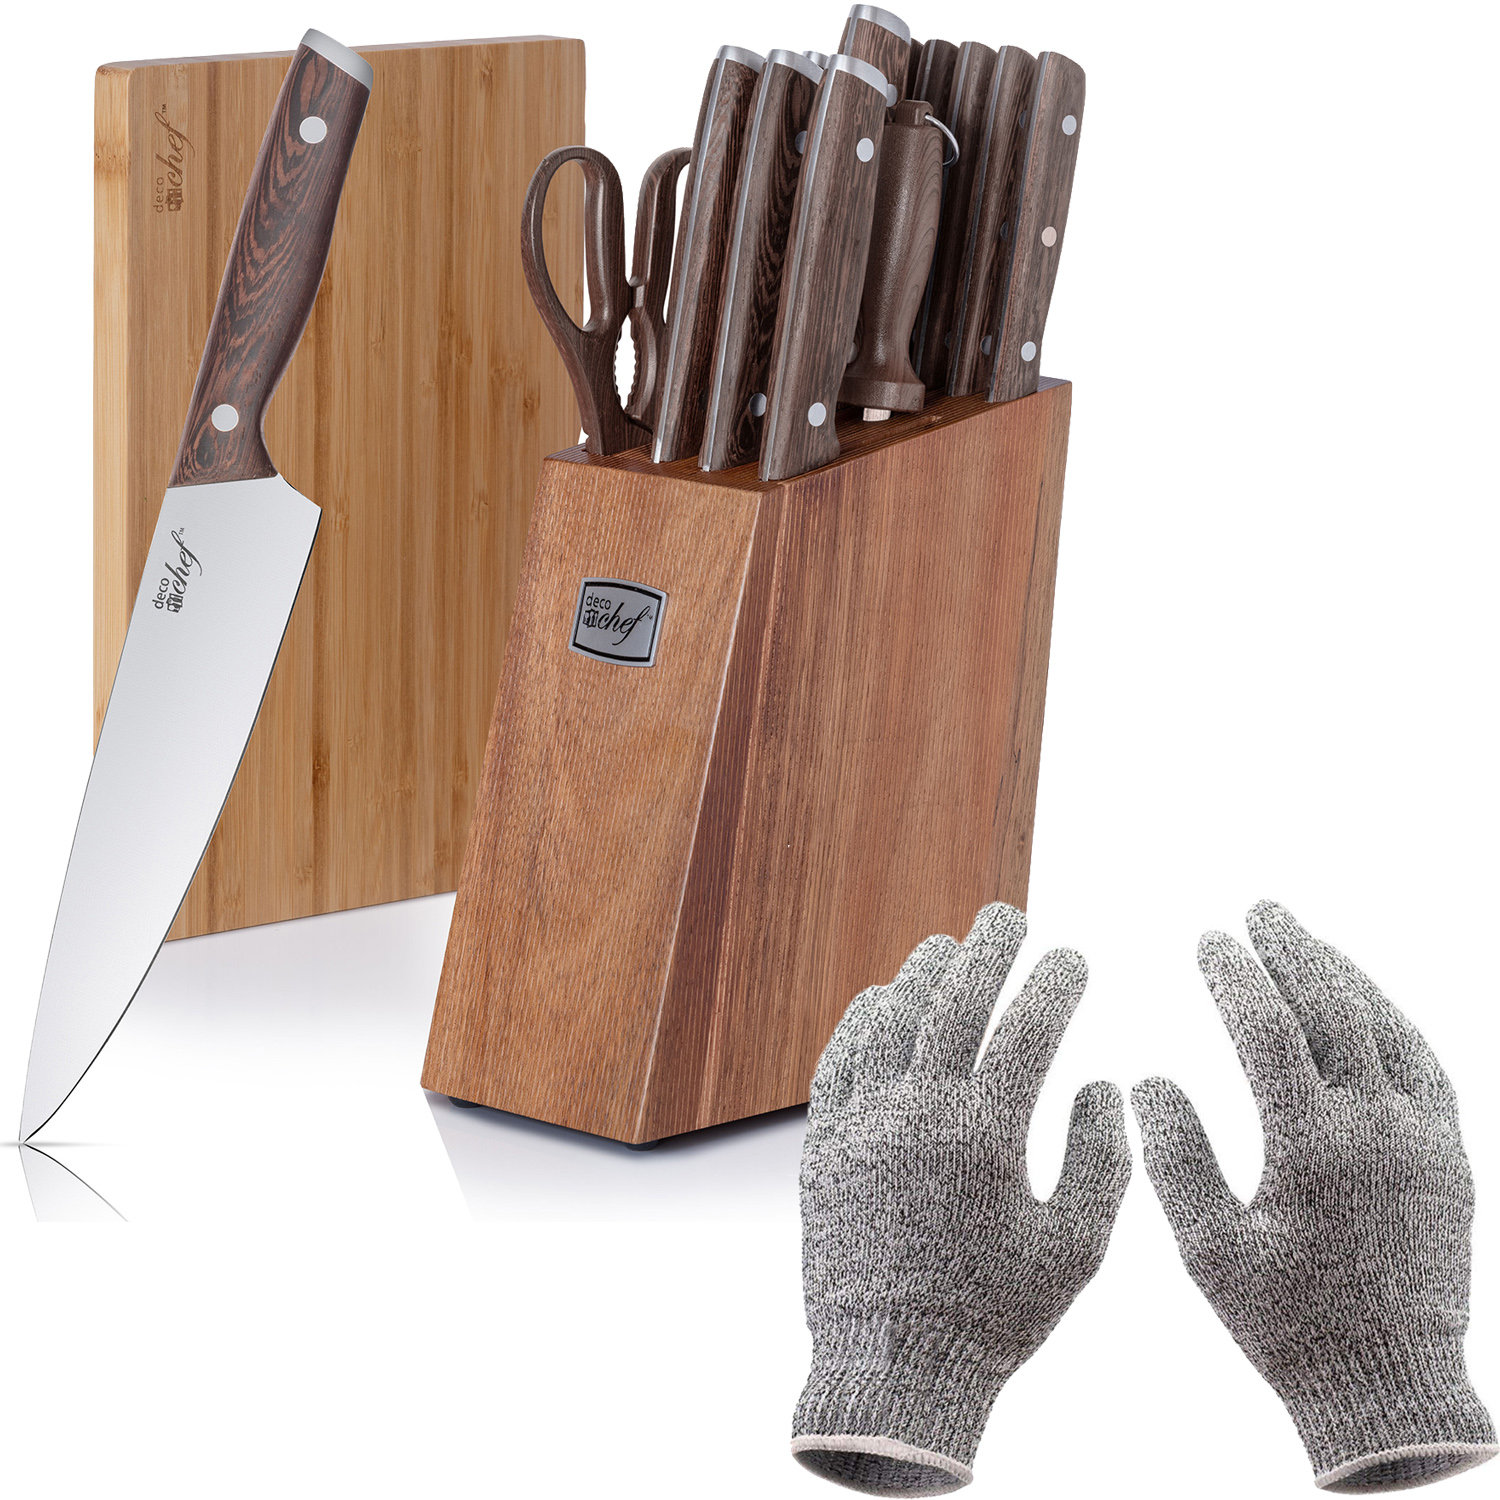   Basics 14-Piece Kitchen Knife Set with High-Carbon  Stainless-Steel Blades and Pine Wood Block, Black: Home & Kitchen